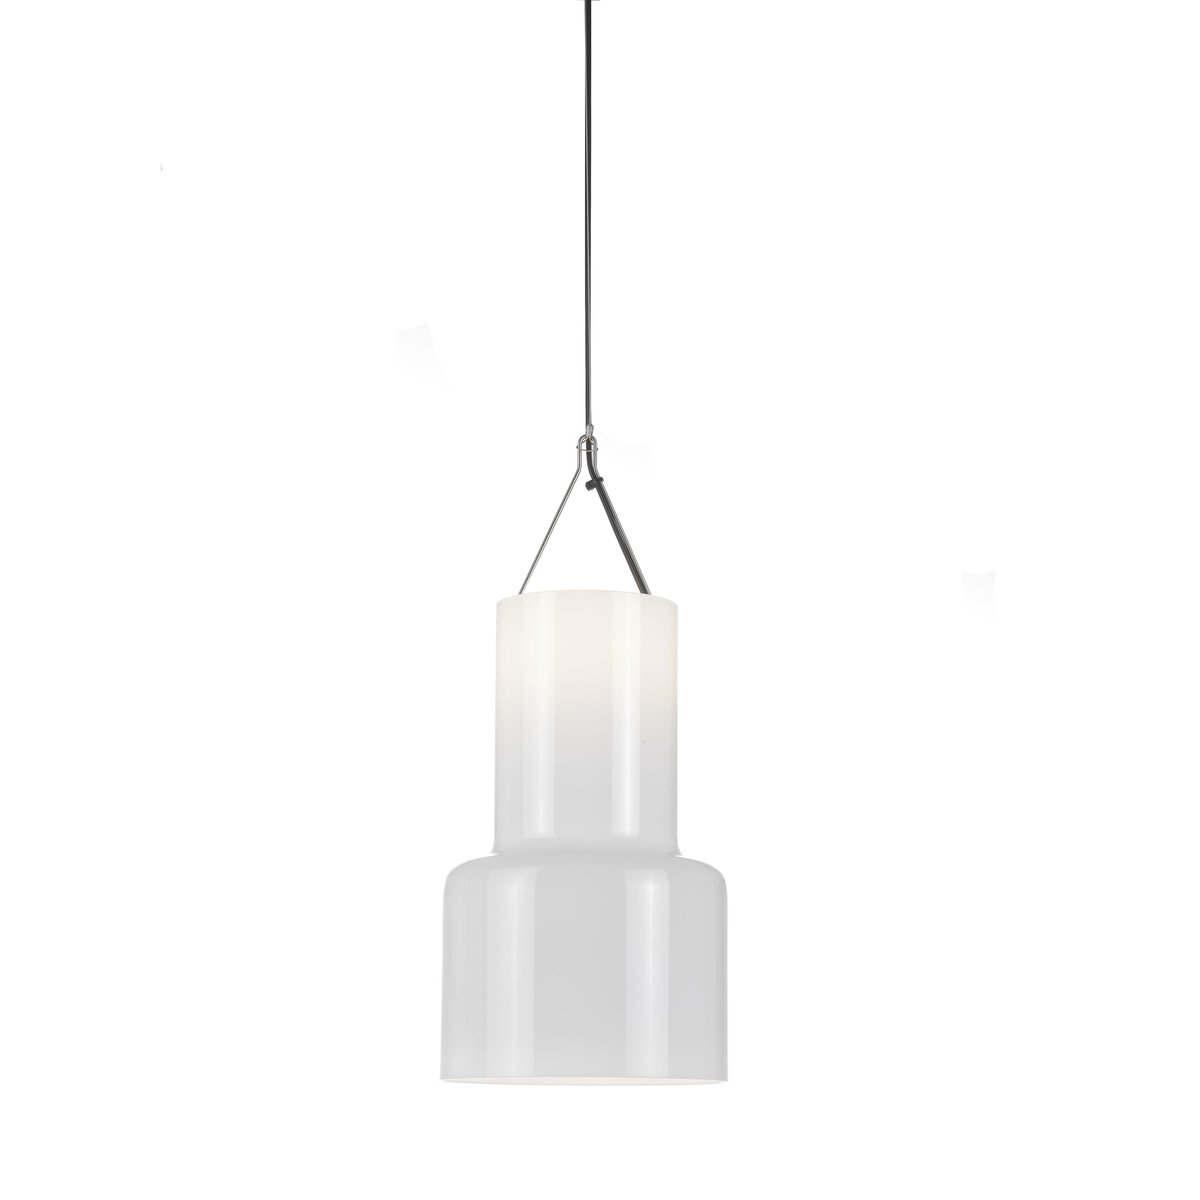 Bsweden Soho hanglamp opaal glas